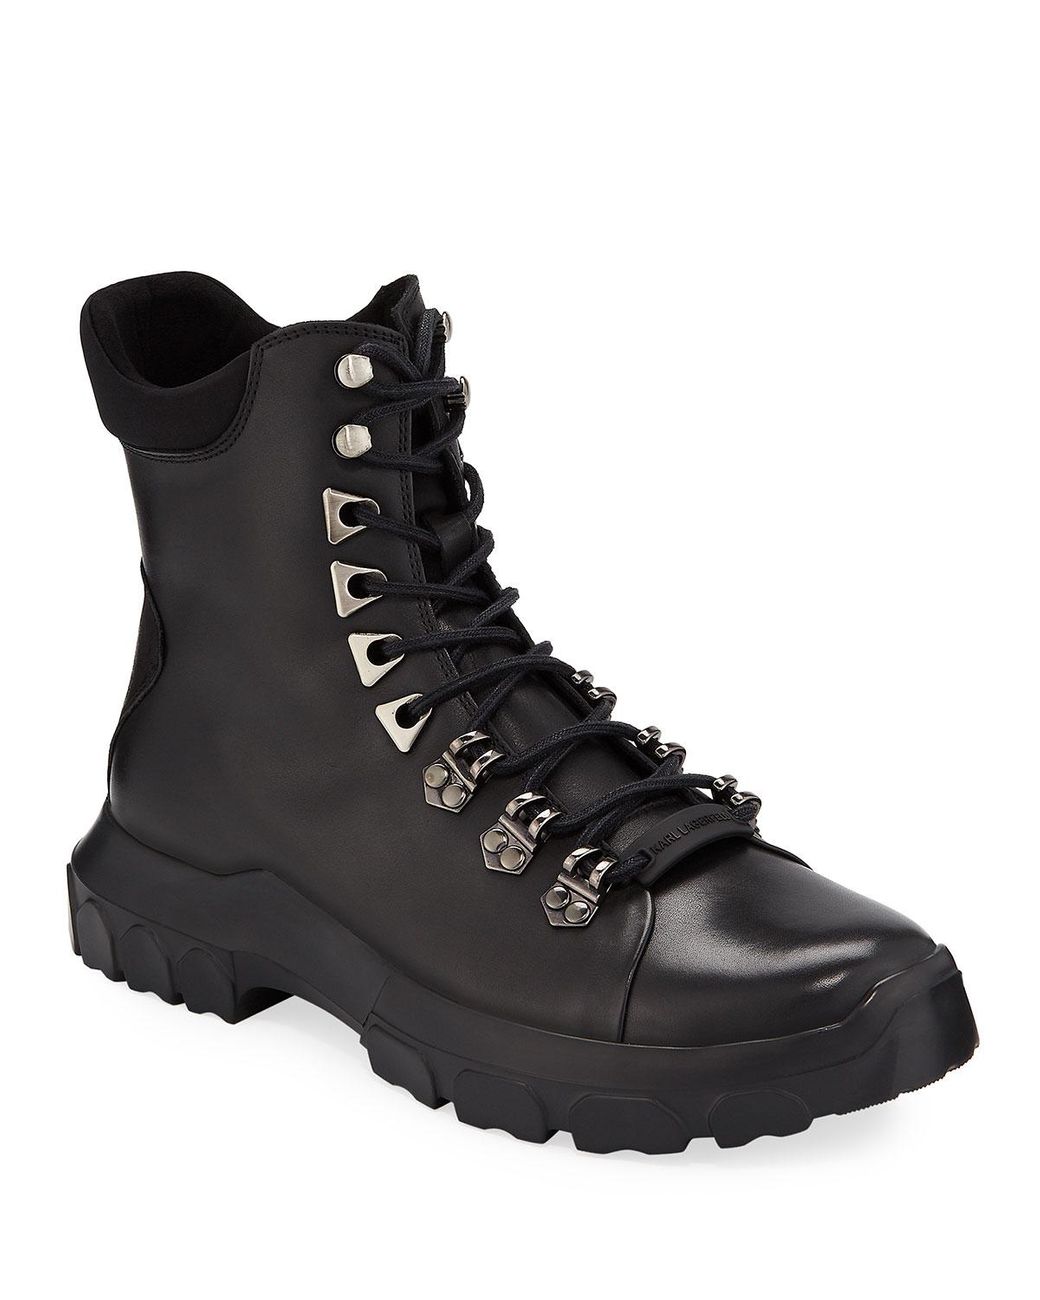 Karl Lagerfeld Leather Sawtooth Hiker Boot in Black for Men - Save 44% ...